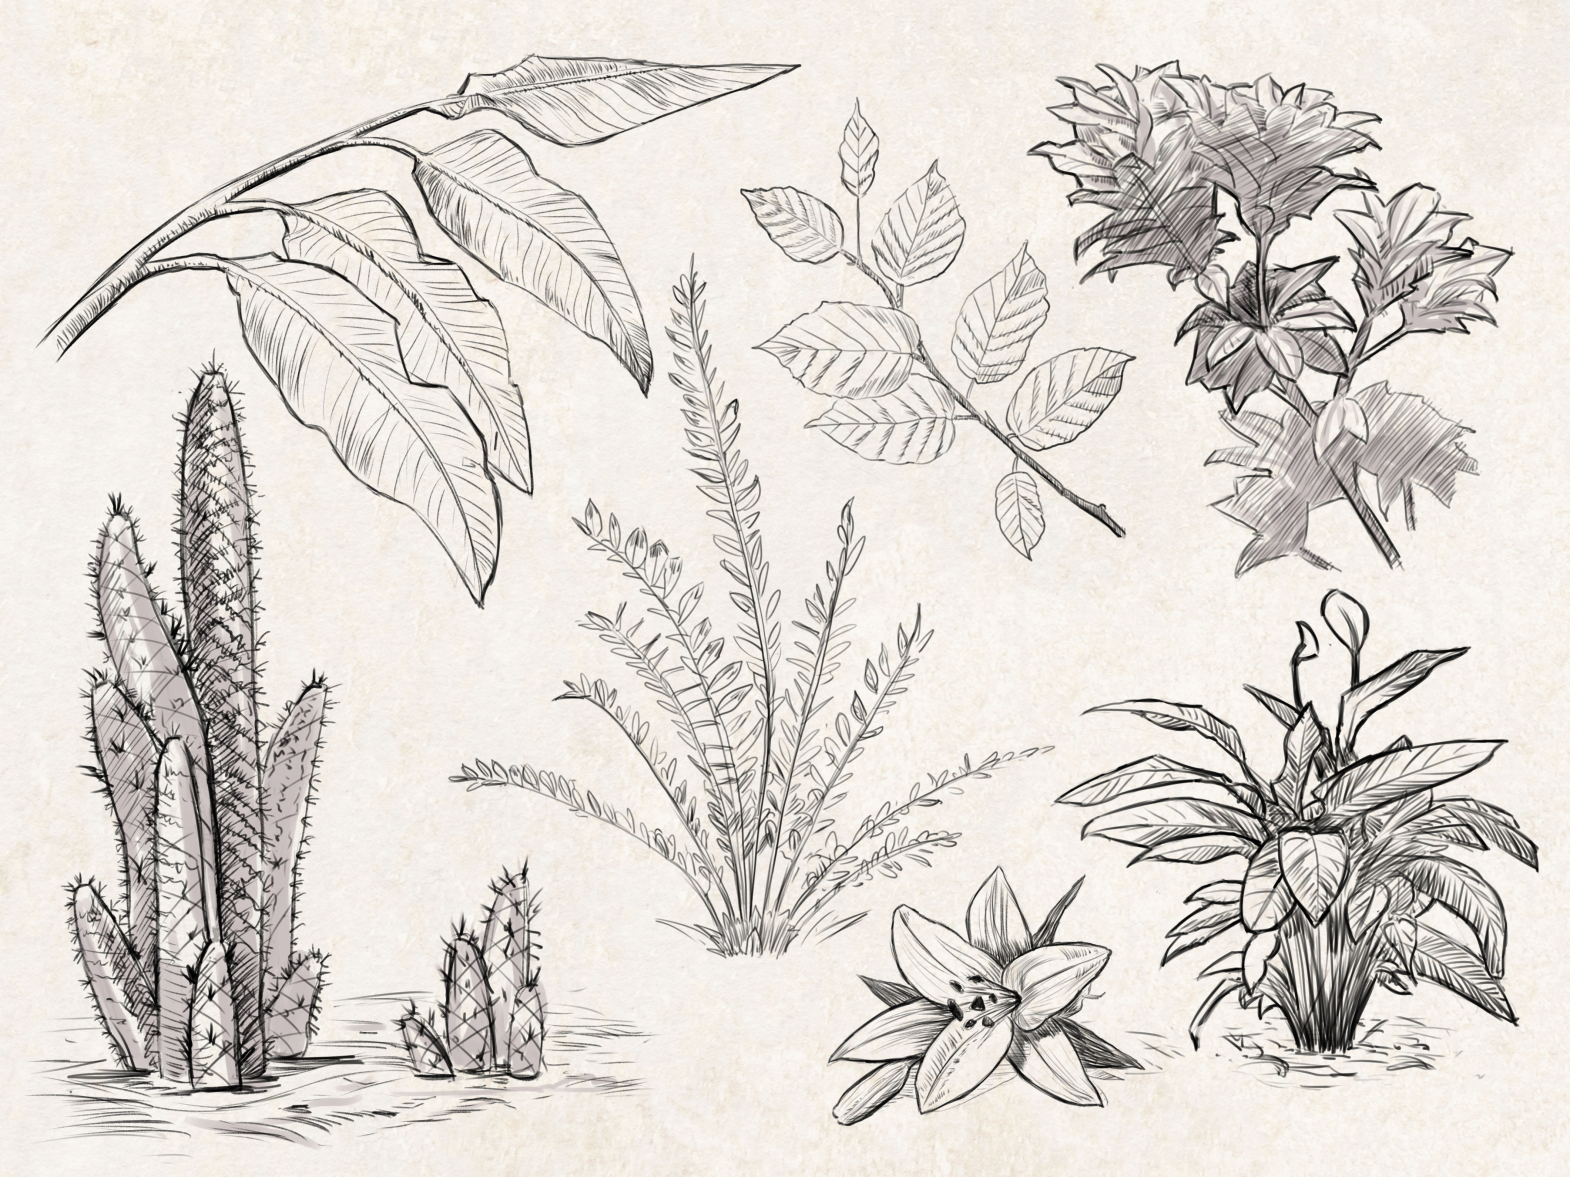 Sketches: Plants #1 by Manfred Rohrer on Dribbble